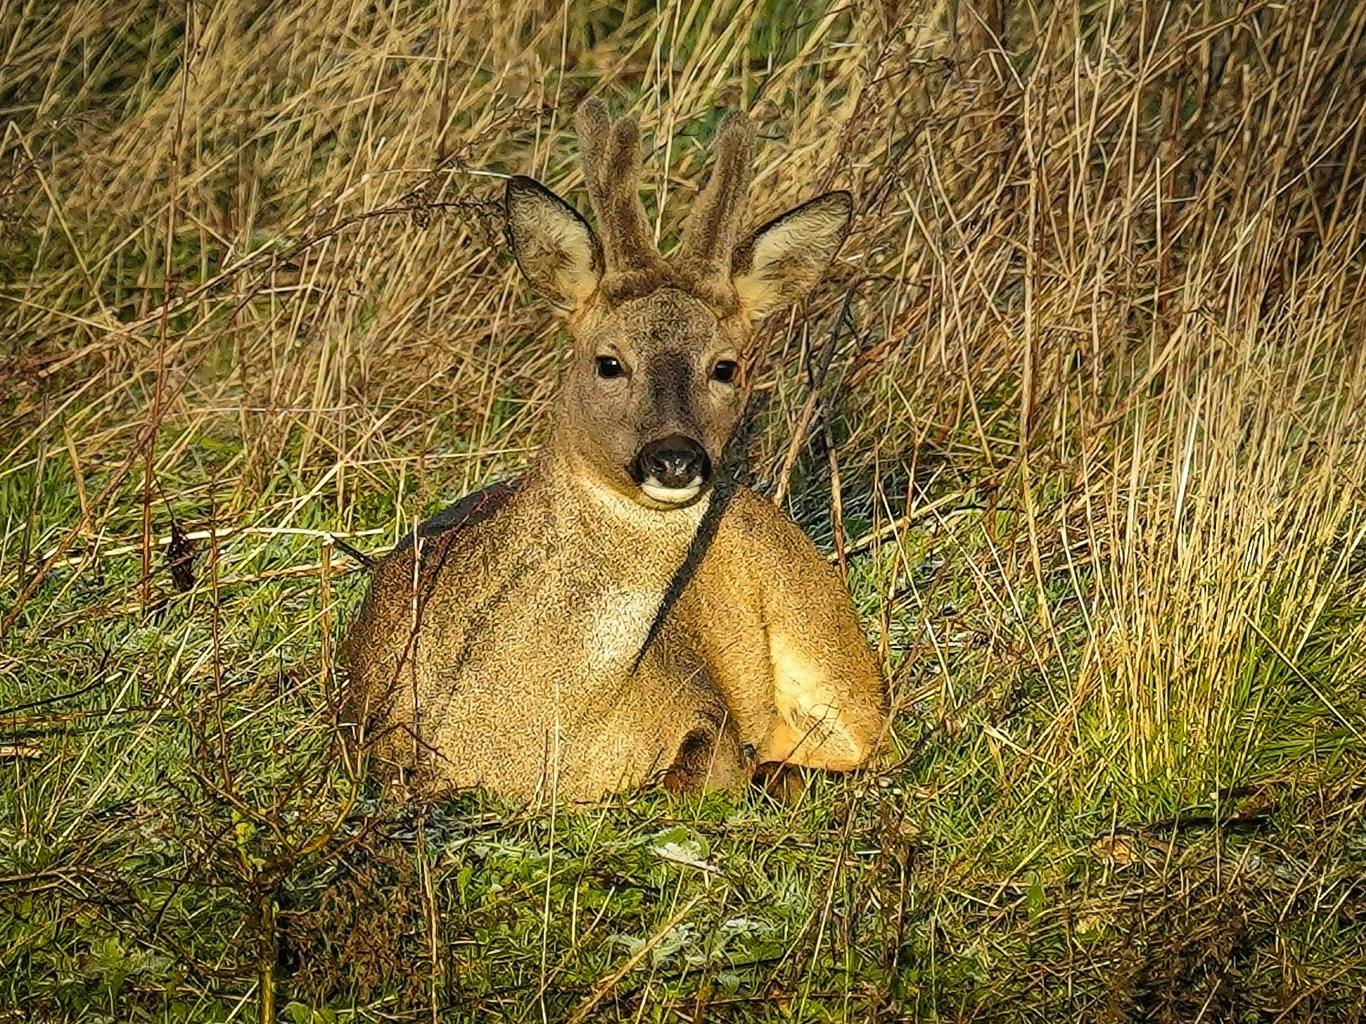 A deer resting in amongst the long grass at RSPB Medmerry nature reserve 